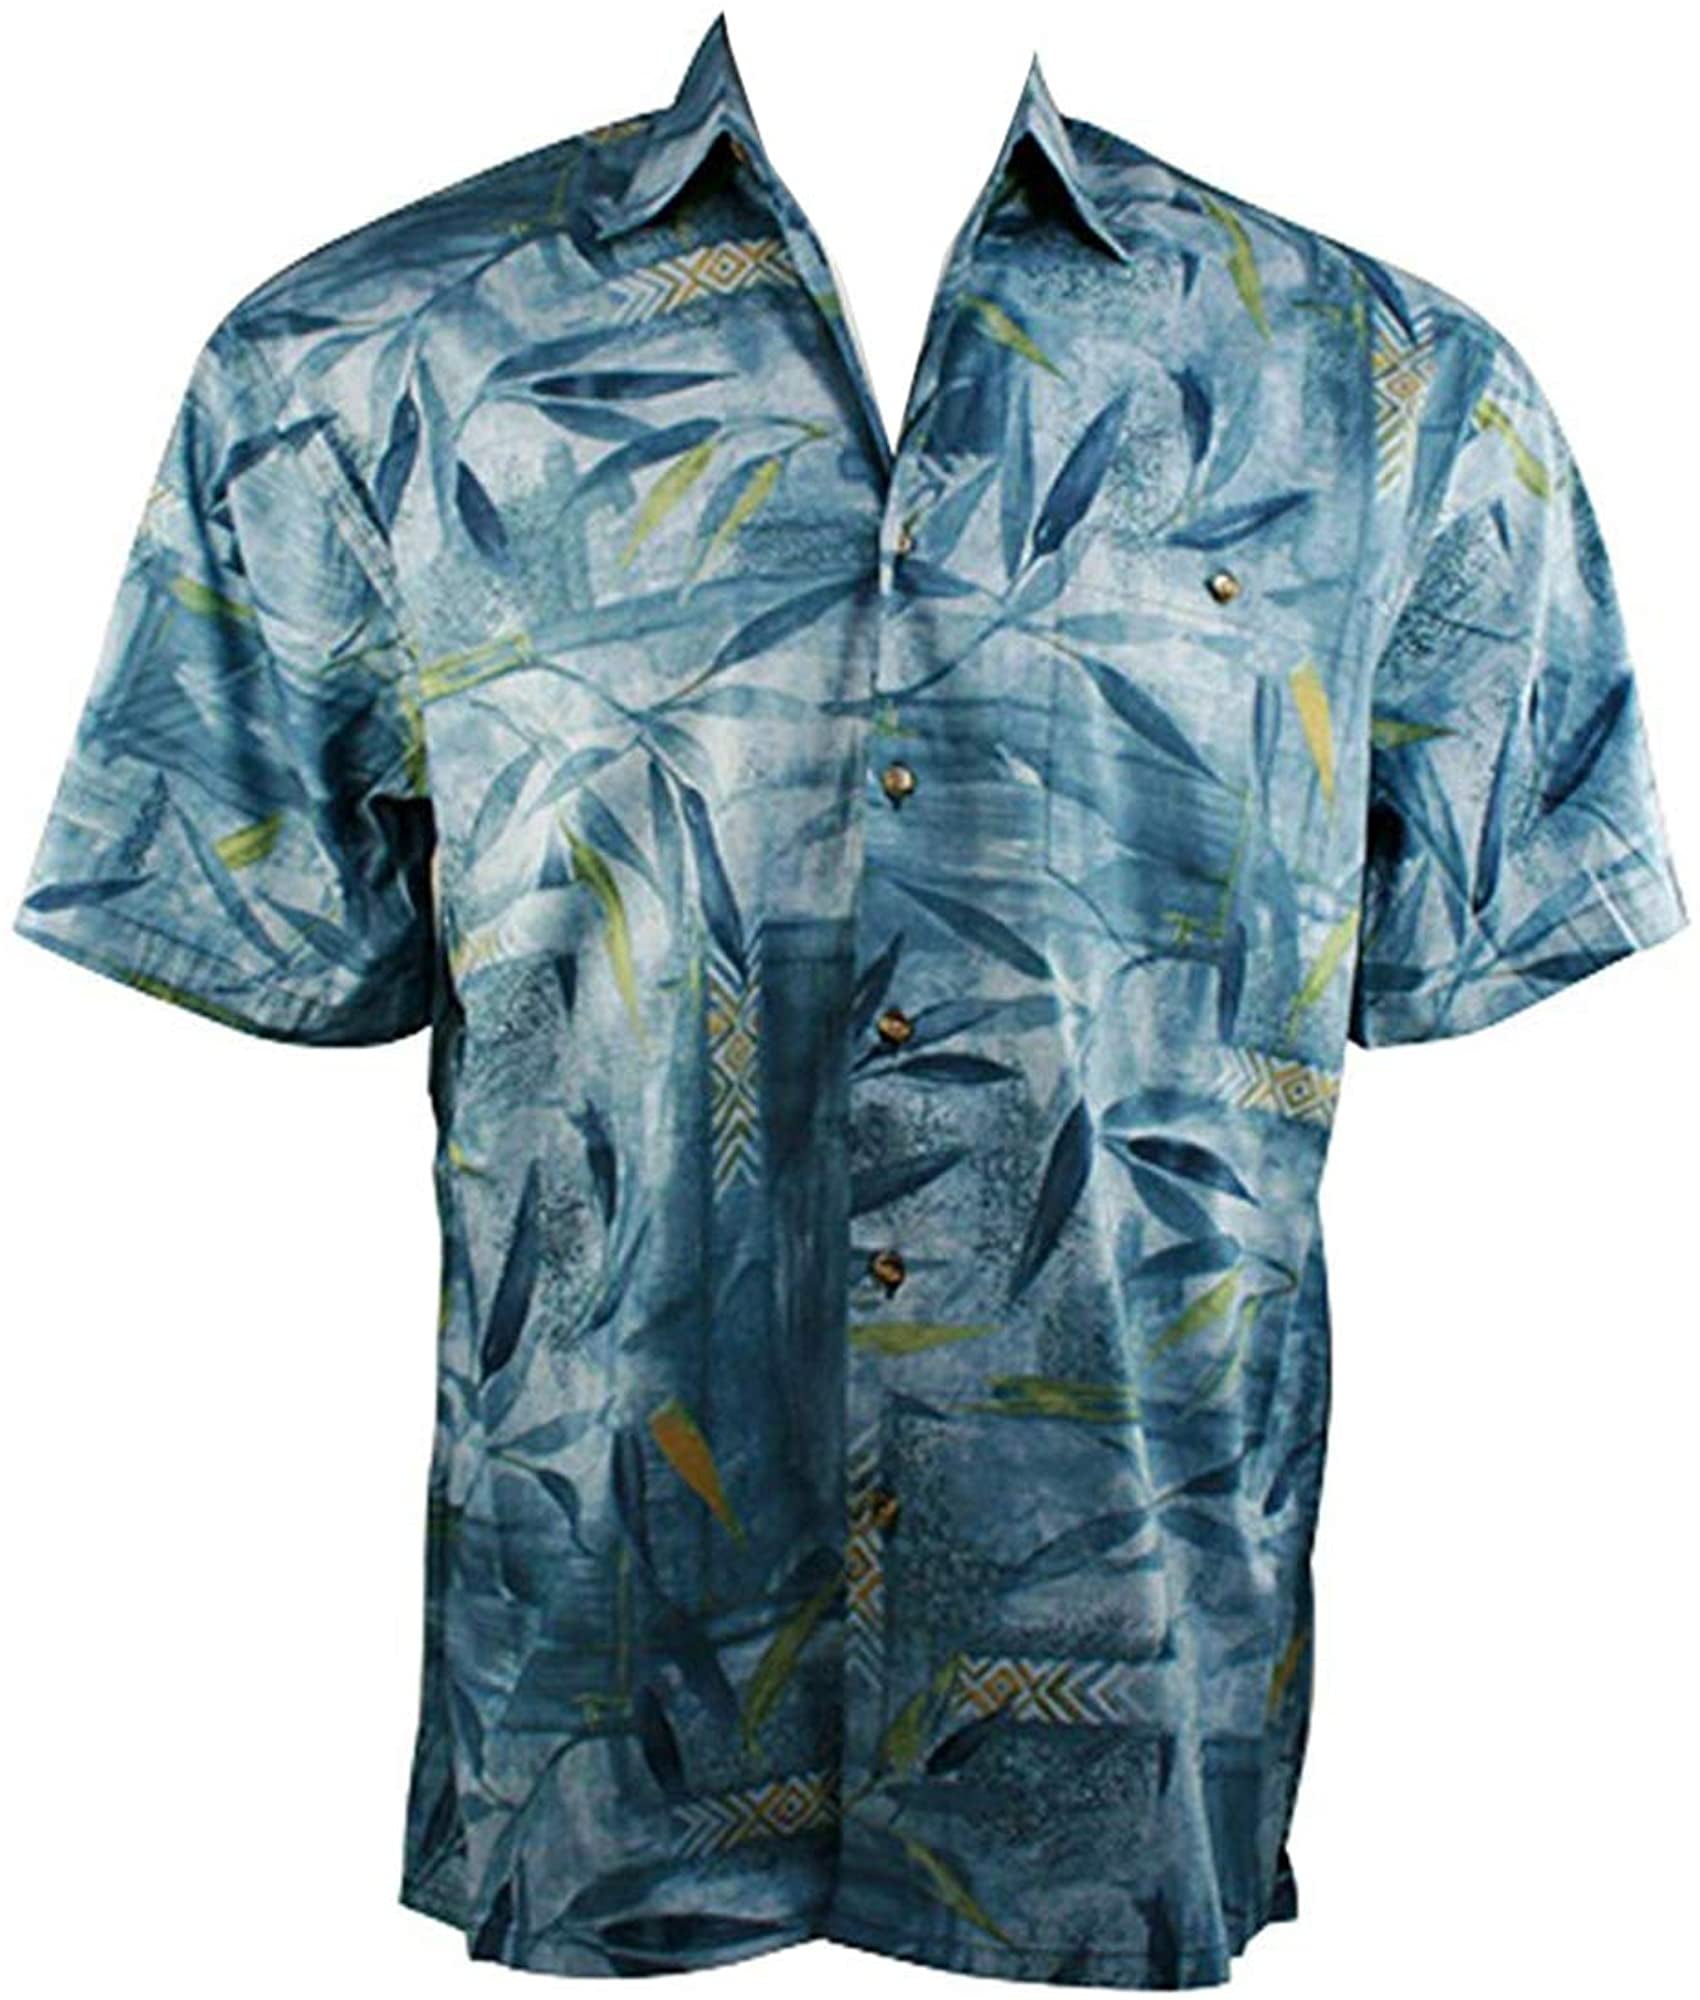 Bamboo Cay - Bamboo Island, Mens Tropical Style Lightweight Cotton Lawn ...